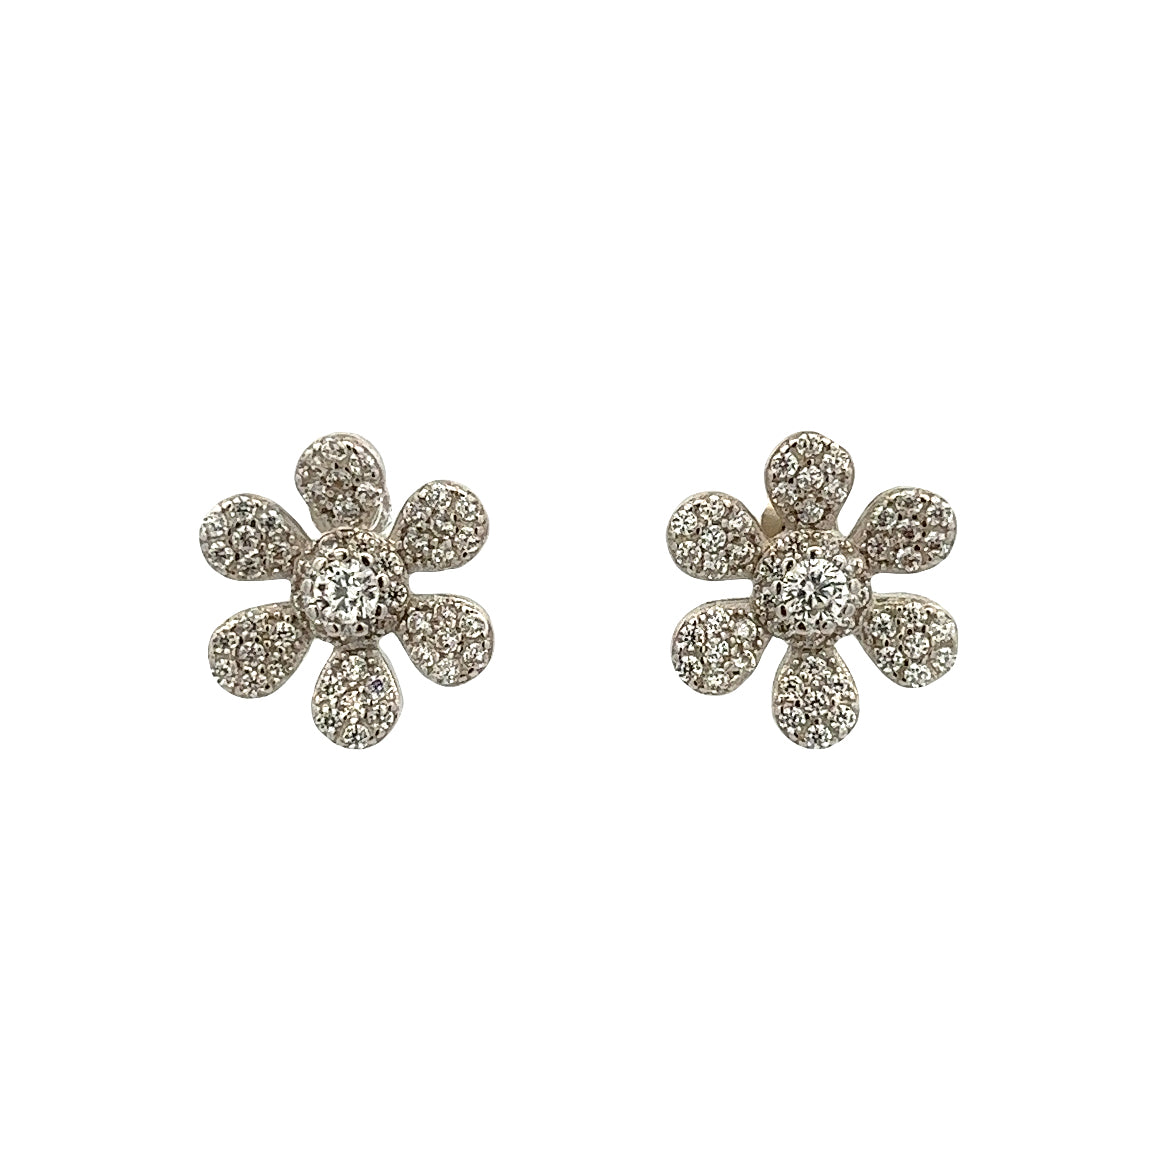 925 SILVER PLATED FLOWER PAVE EARRINGS WITH CRYSTALS